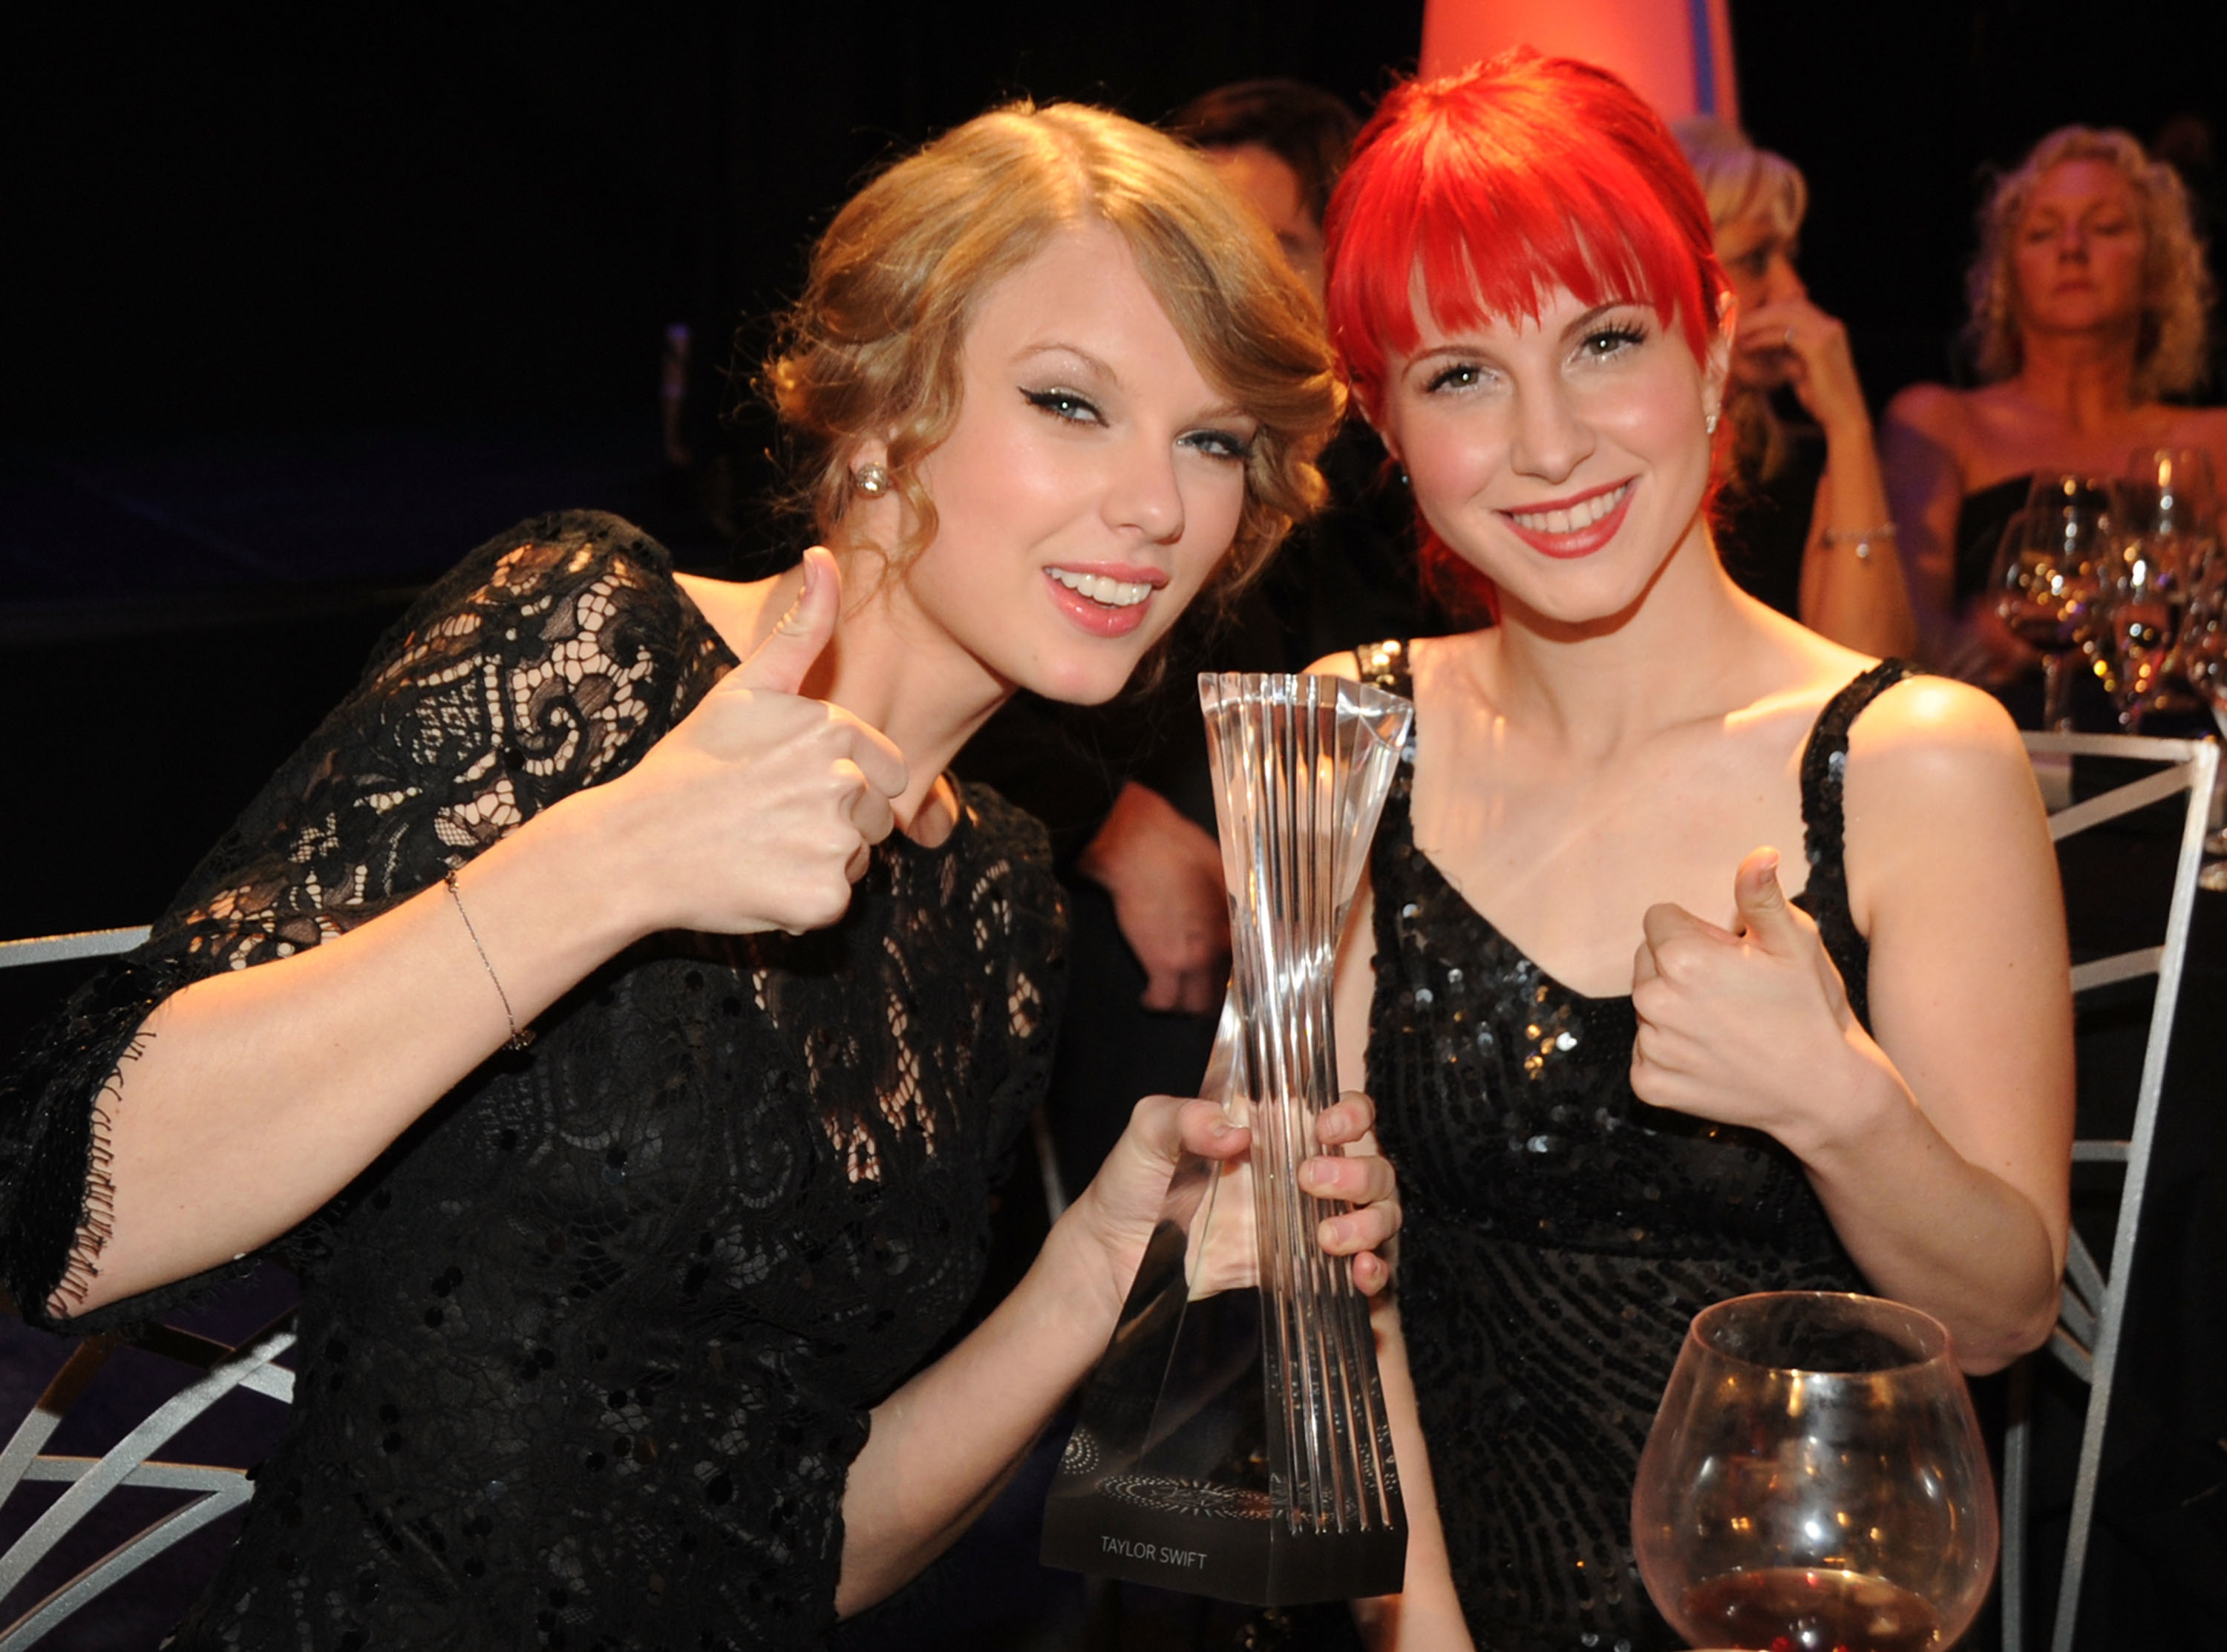 Taylor Swift , who&#x27;s holding an award, and Hayley Williams giving the thumbs-up and smiling as they pose for a photo